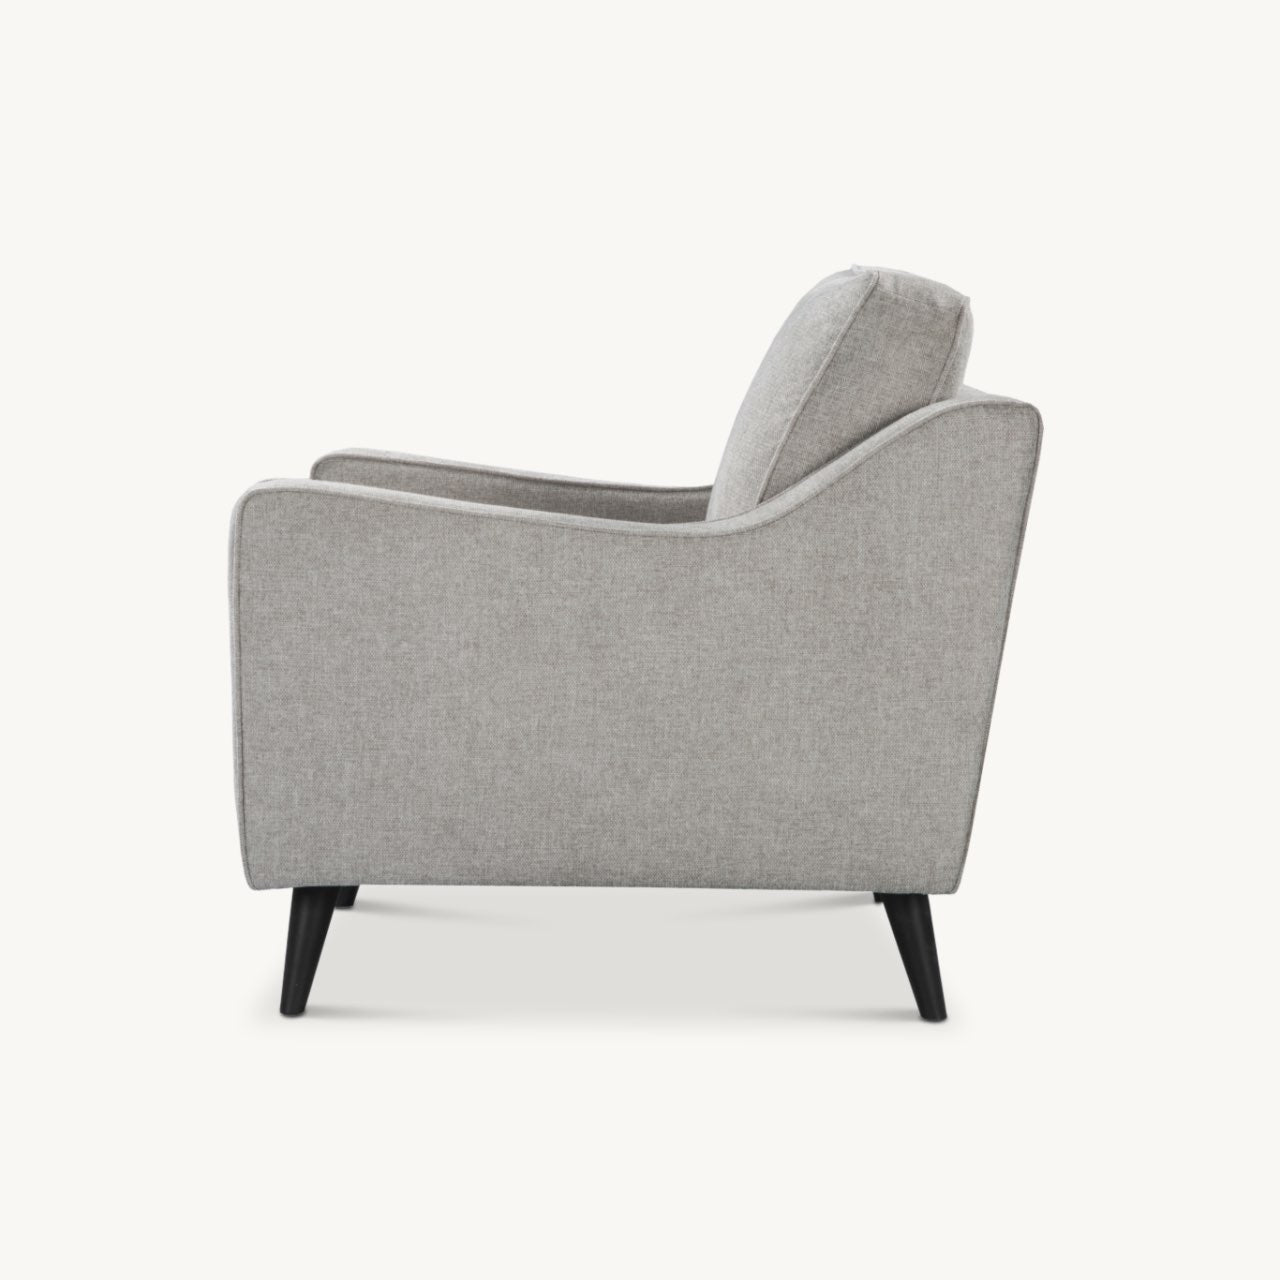 compact, modern armchair in stone grey linen